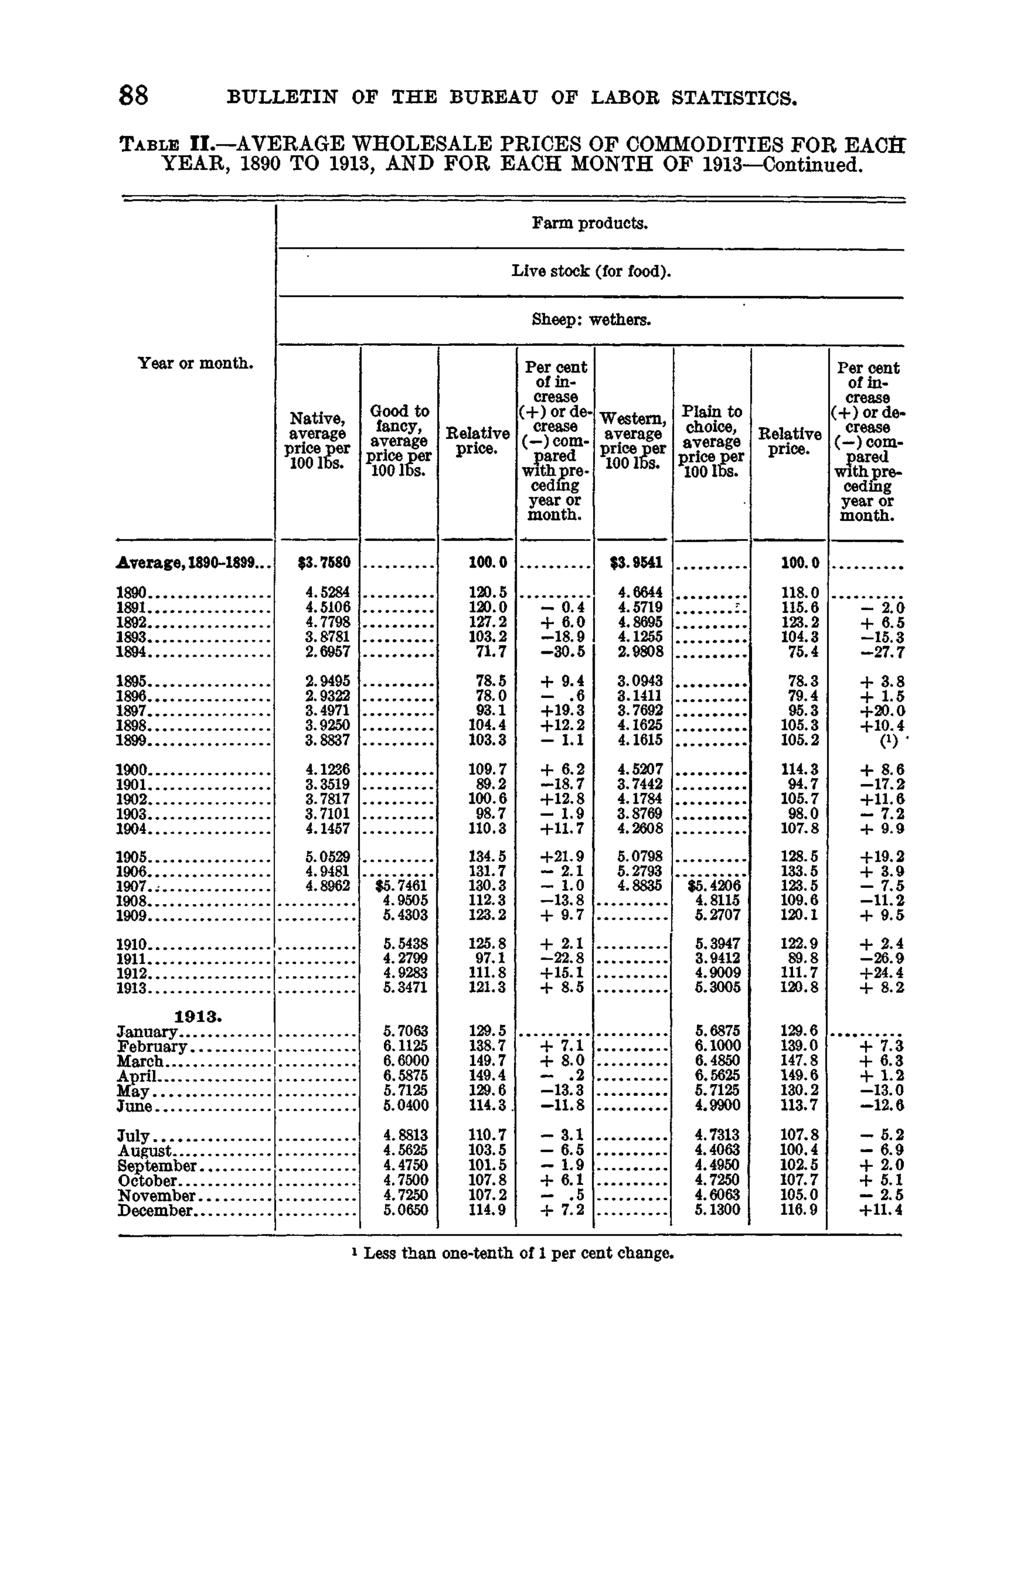 88 BULLETIN OF THE BUBEAU OF LABOR STATISTICS. T a b l e II. AVERAGE WHOLESALE PRICES OF COMMODITIES FOR EACH YEAR, 1890 TO 1913, AND FOR EACH MONTH OF 1913 Continued. Farm products.